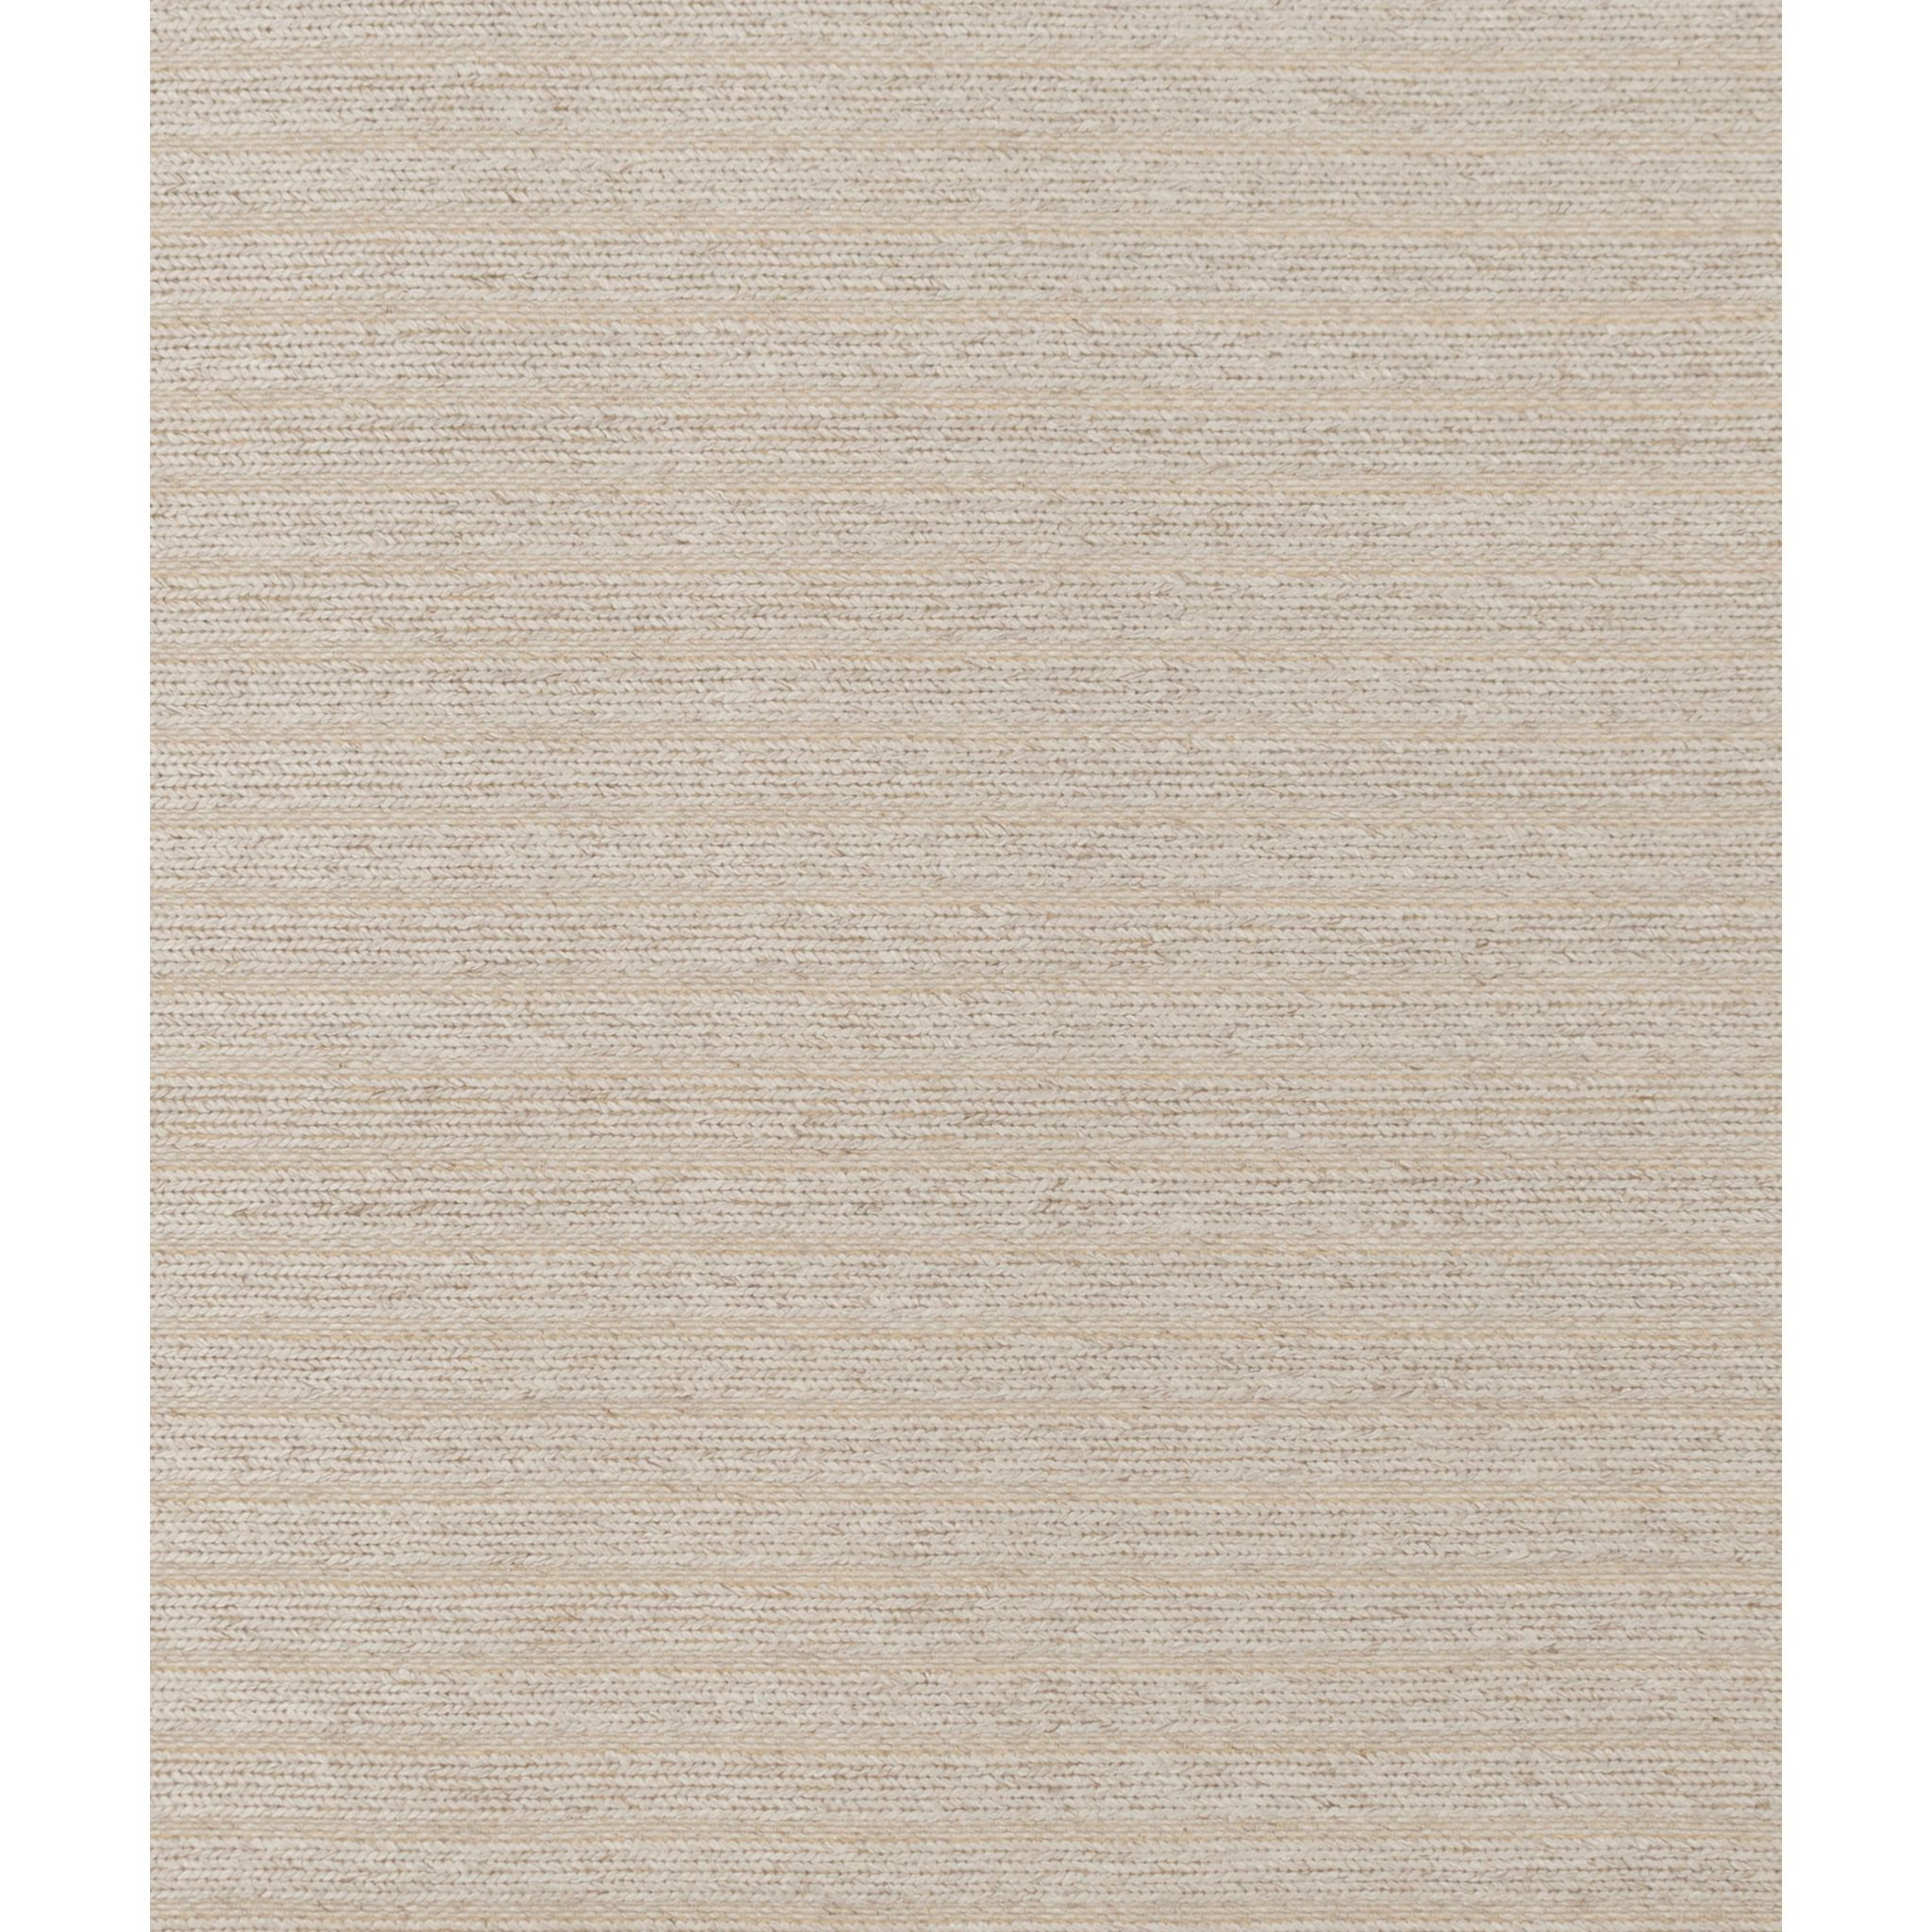 Digby Hand-Loomed Carpet, Oatmeal Default Title